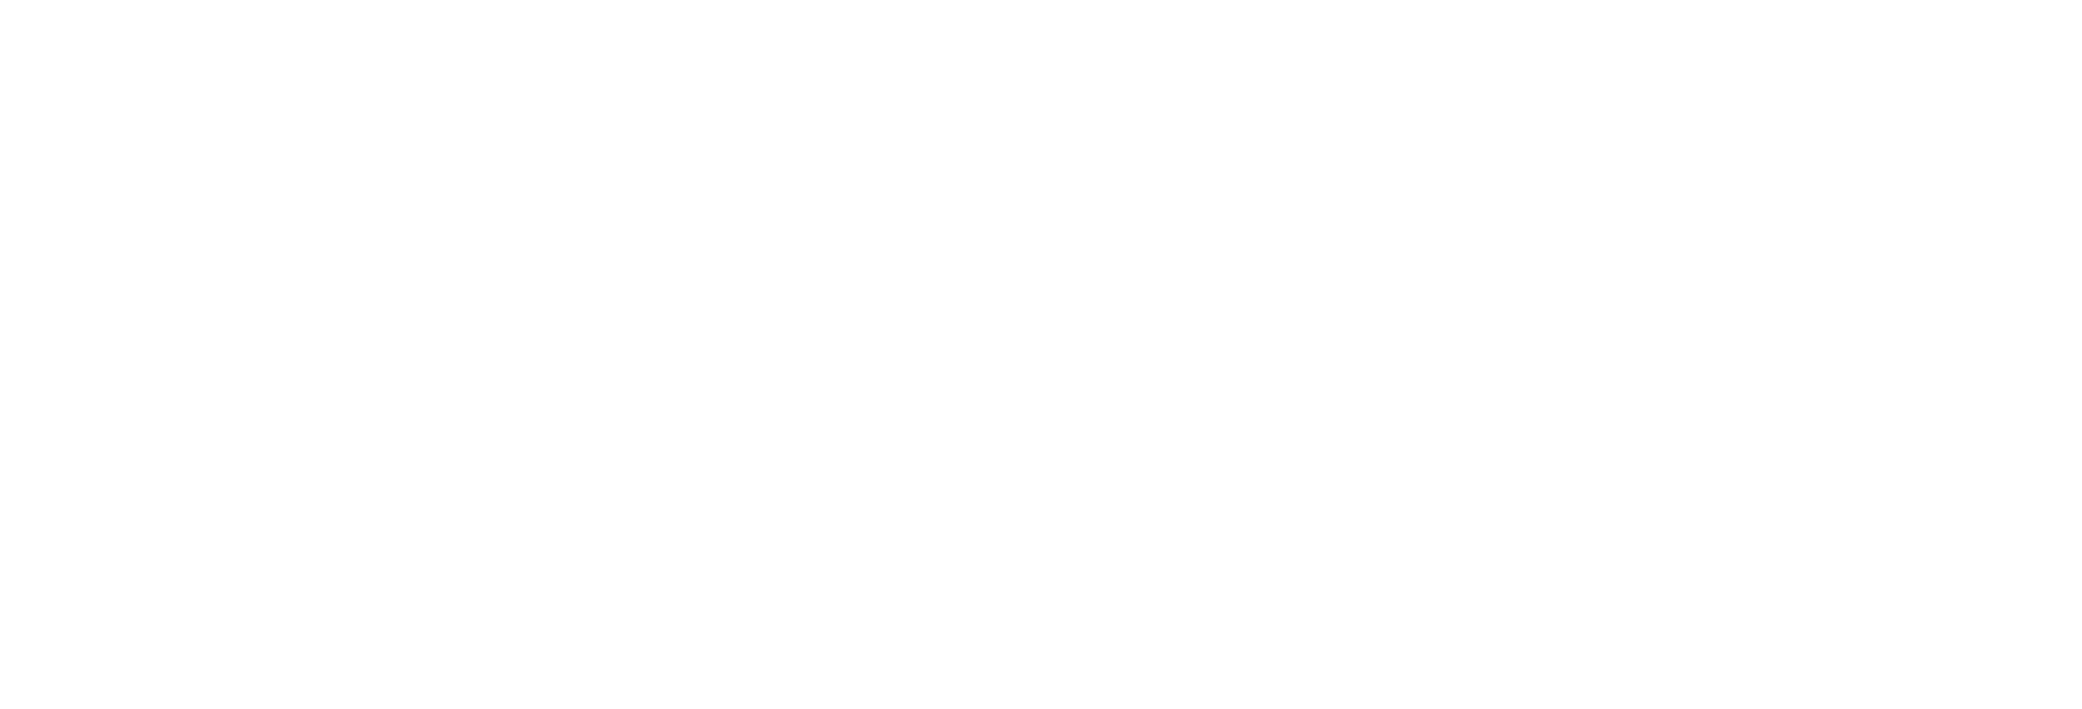 gene therapy essay introduction